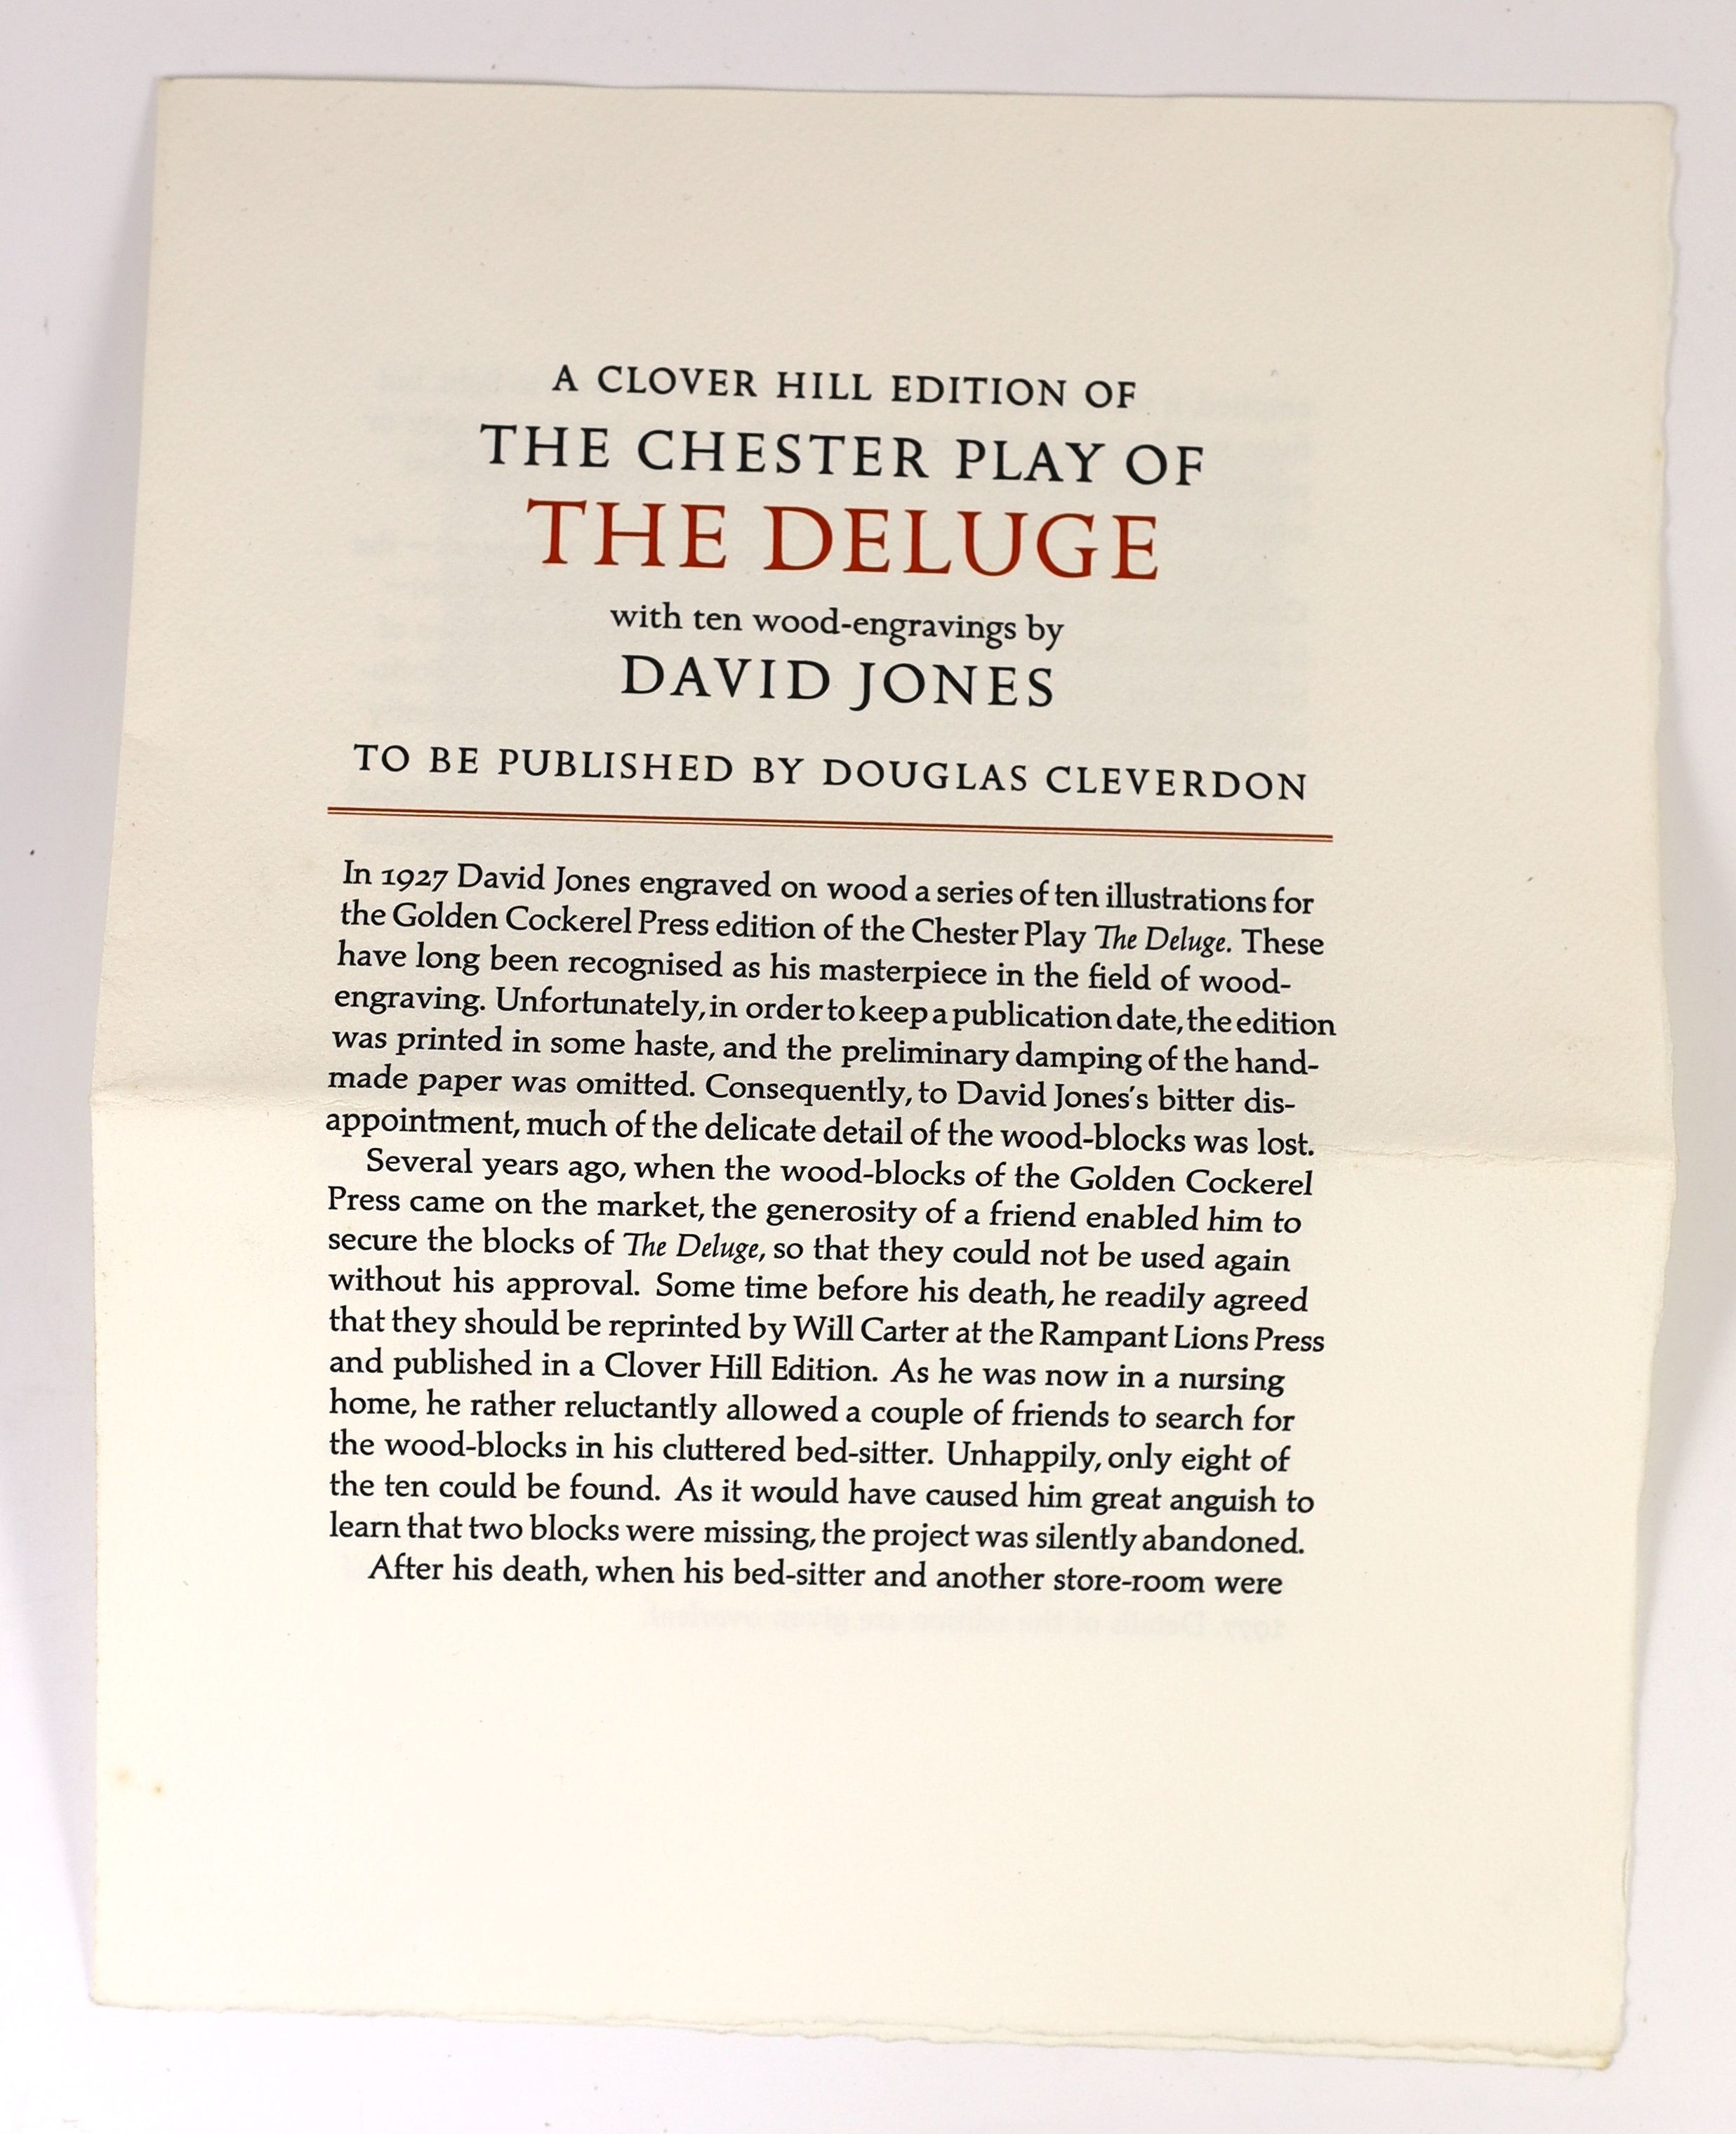 Jones, David - The Chester Plays of the Deluge. Limited edition, No. 230 of the 250 ‘ordinary copies’. Complete with 10 wood engravings in the text. Quarter cloth and marbled paper with gilt title direct on spine. With o